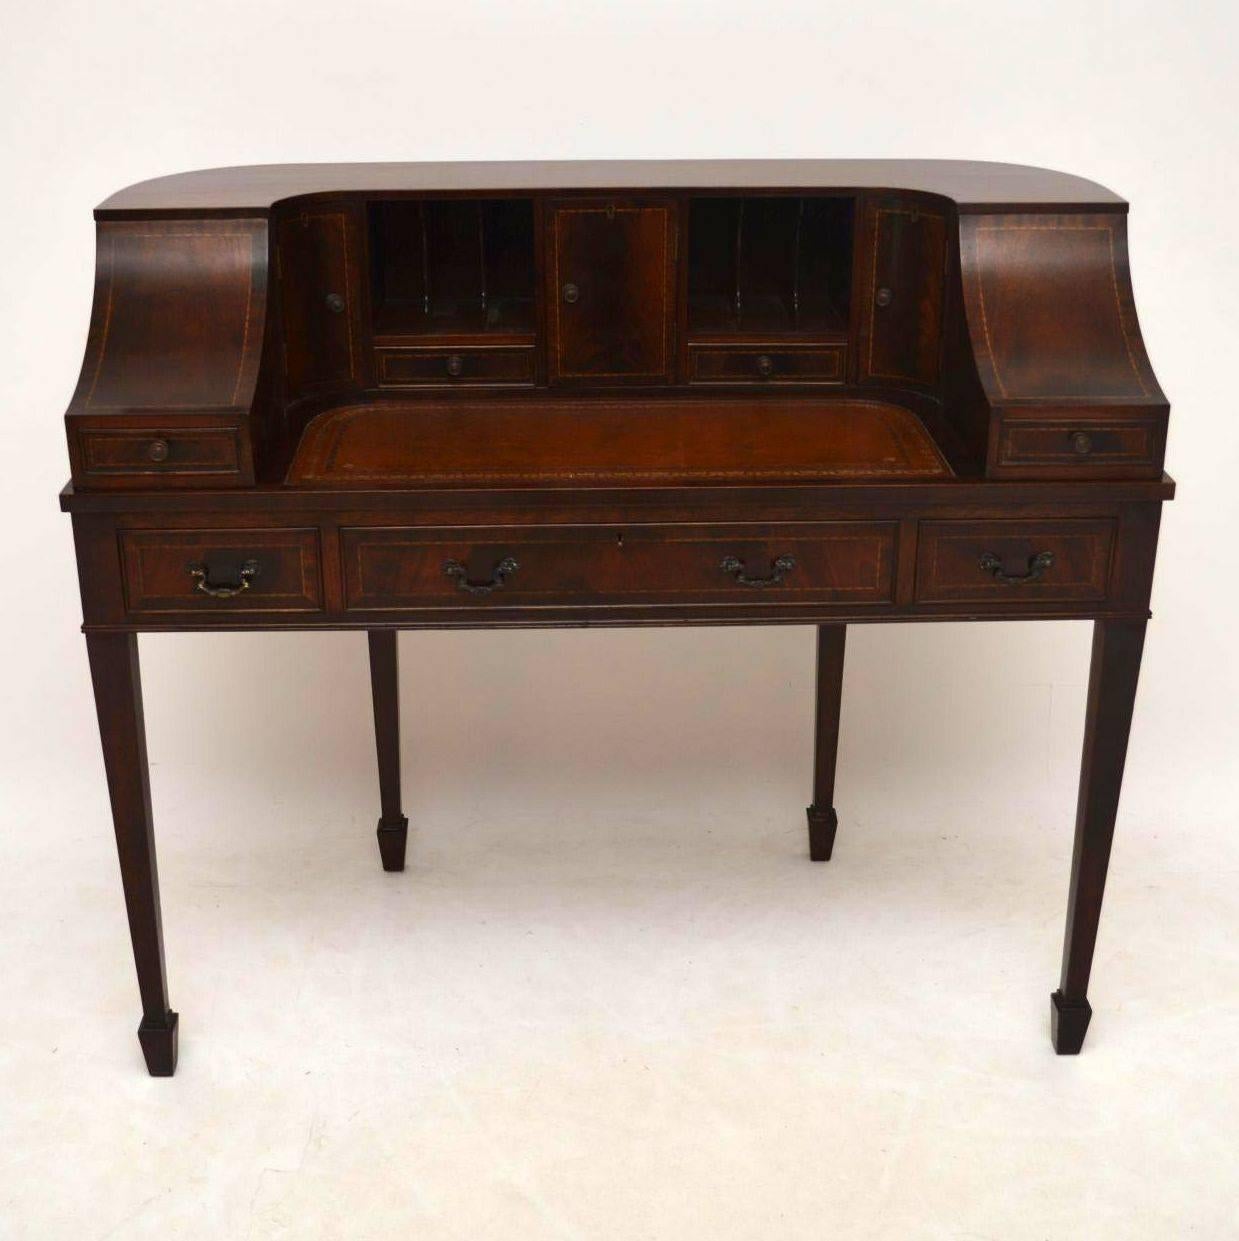 This antique Sheraton style 'Carlton House' desk is good quality & is a 20th century copy of this famous design. I would date it from around the 1950s-1960s period and to look at, it has the look of an Edwardian piece. This desk is predominately